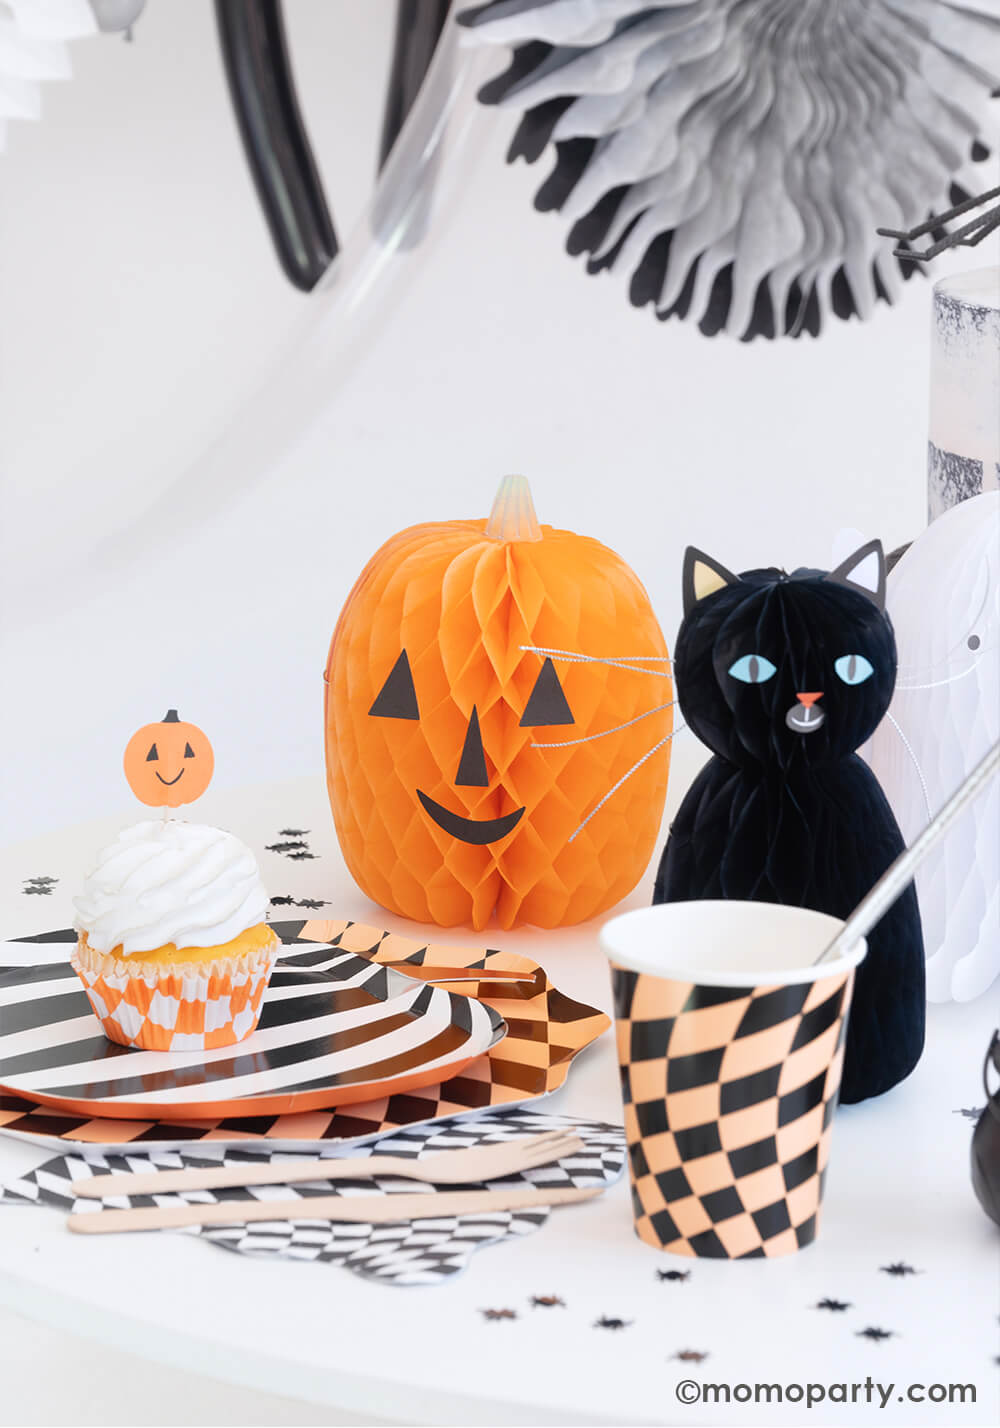 A fun Halloween party table in the classic black and orange colors featuring Momo Party's Halloween Checker Plates, Mod Pattern Pumpkin Plates, checkered napkins and party cups by Meri Meri. On the table spider shaped confetti is scattered with honeycomb cat and pumpkin paper decorations as the centerpiece. On the plates there's a cupcake topped with a Halloween pumpkin topper. All makes a fun and whimsy inspiration for kid's friendly Halloween party ideas.